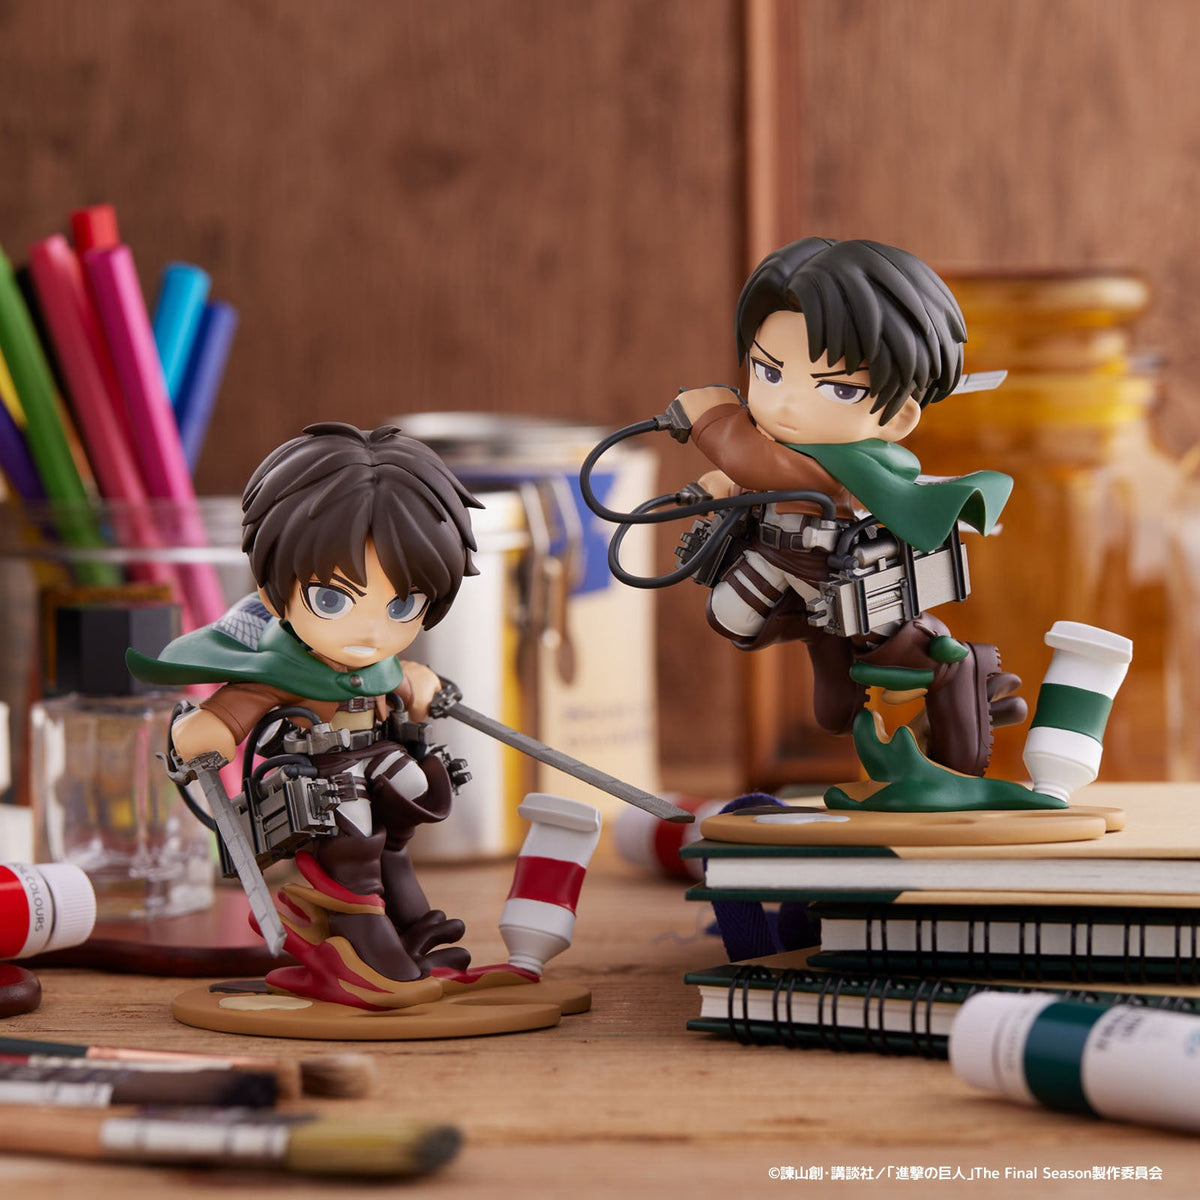 Attack on Titan PalVerse Palé. &quot;Eren Yeager&quot;-Bushiroad Creative-Ace Cards &amp; Collectibles